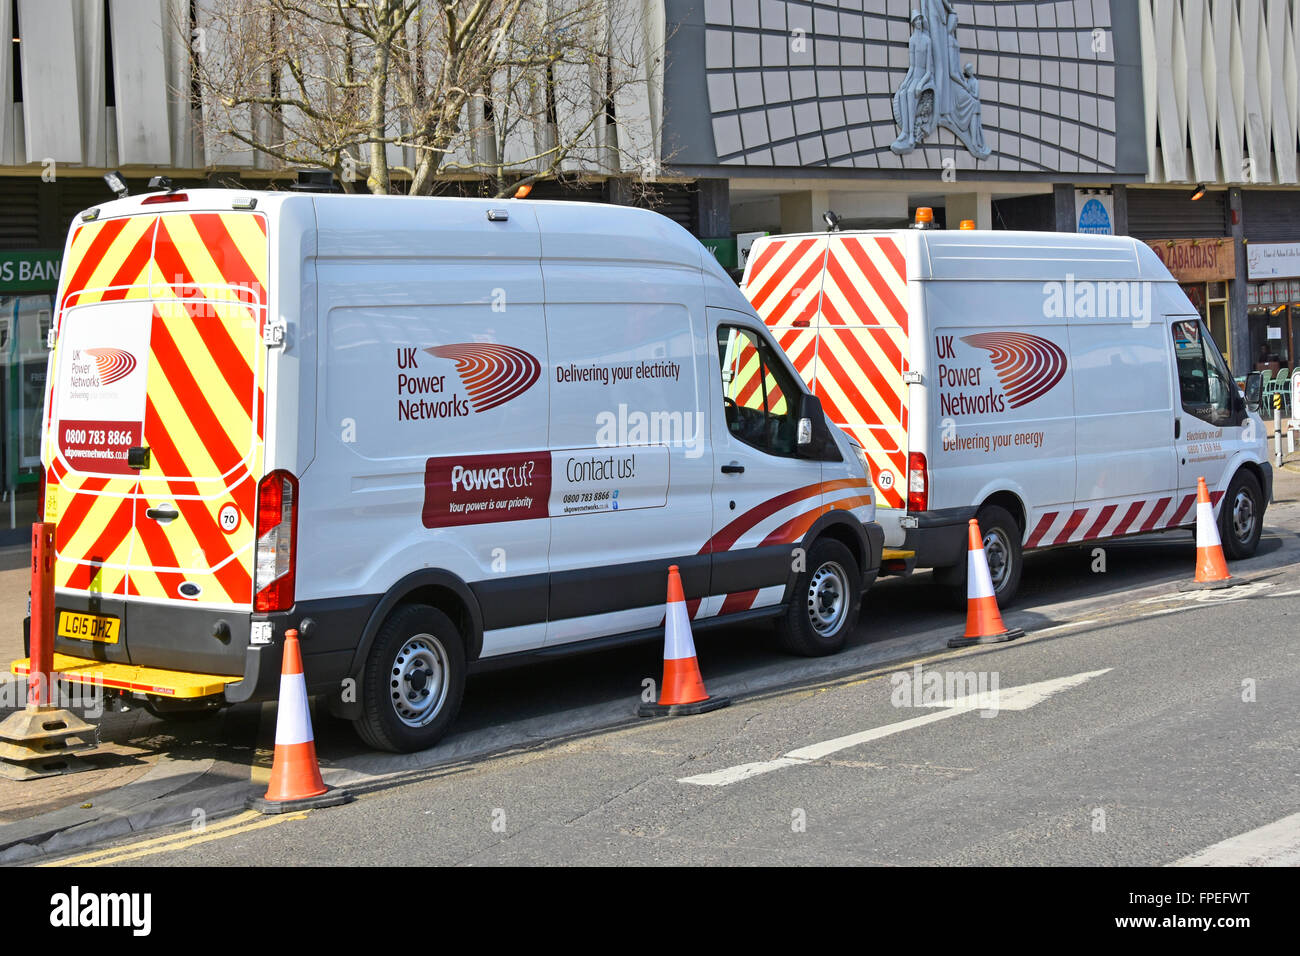 Two UK Power Networks commercial vehicle vans parked up during street works to underground electricity supplies  East Croydon South London England UK Stock Photo